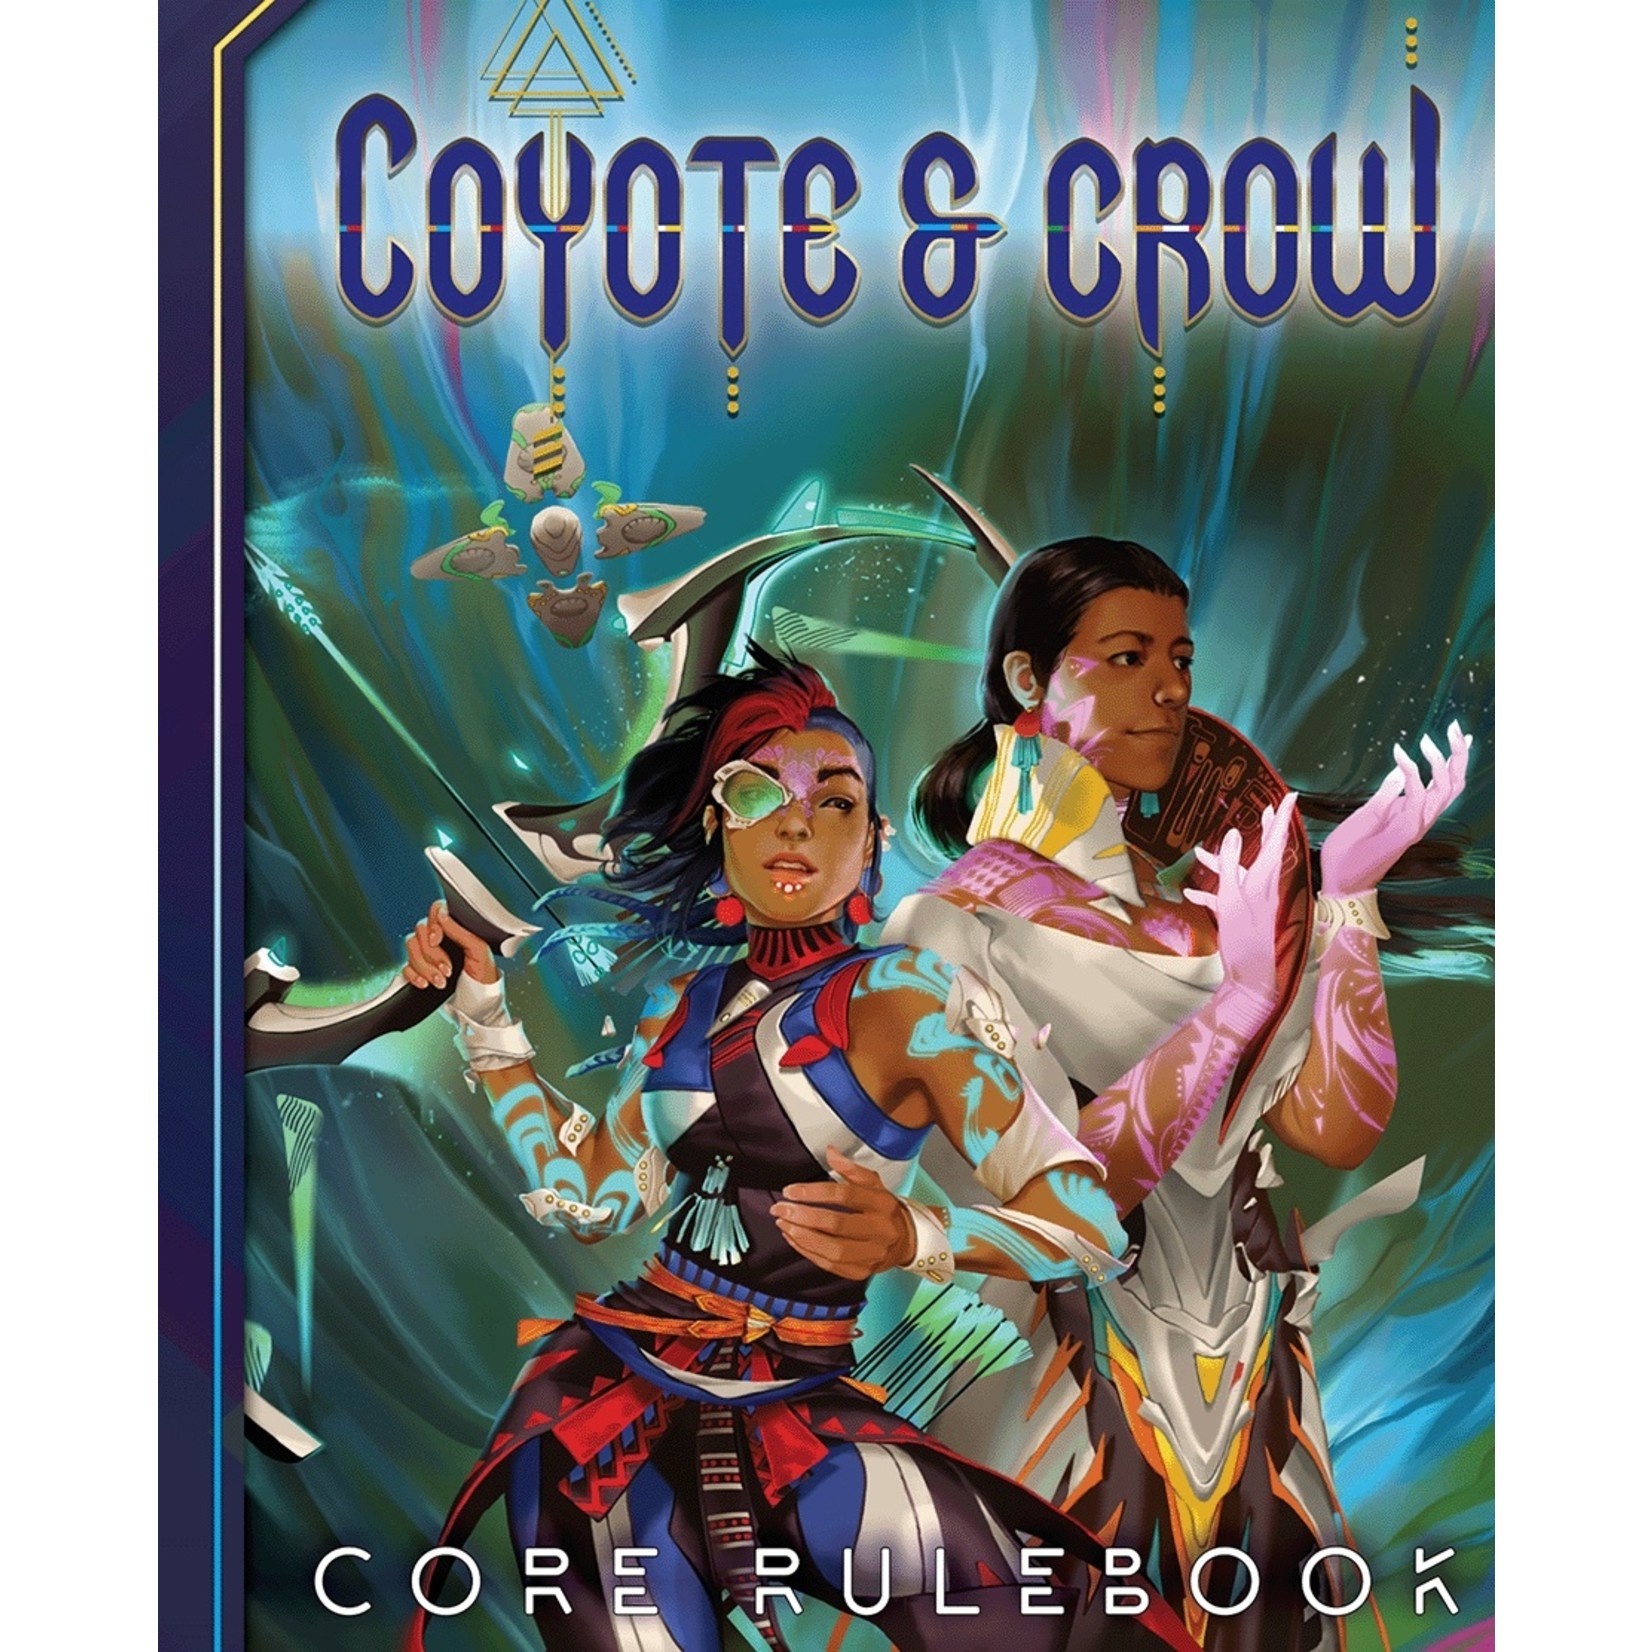 Coyote and Crow Coyote and Crow RPG